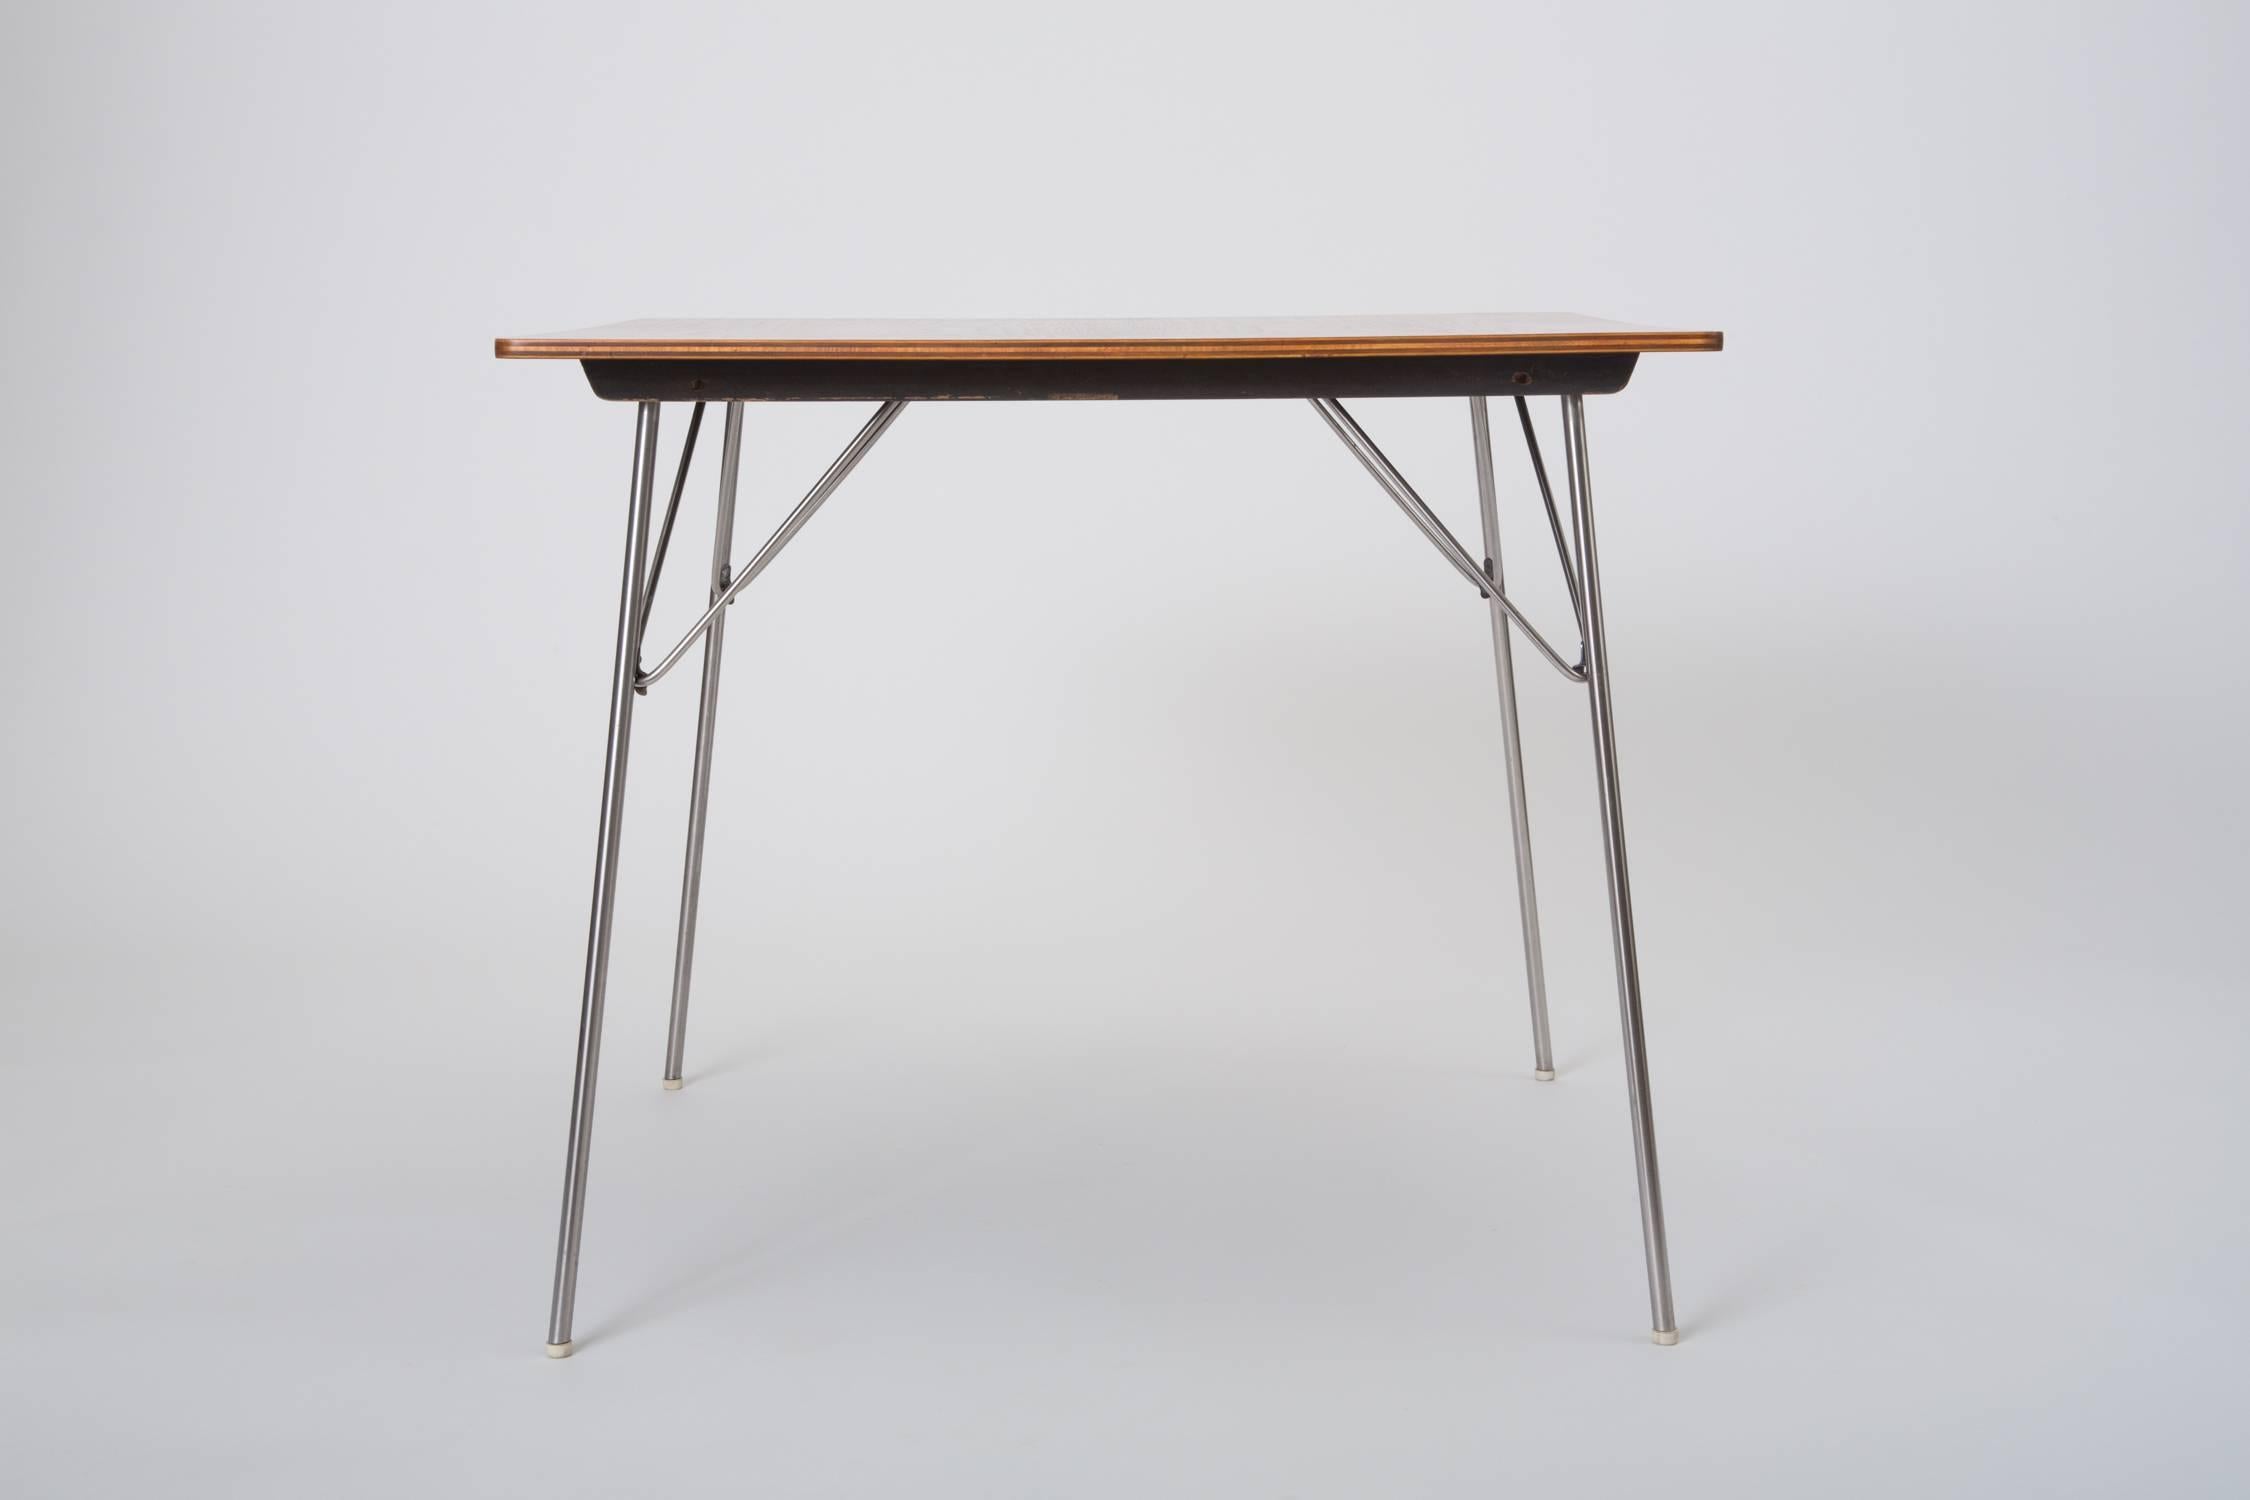 A square dining table with walnut veneered surface and folding metal legs, designed by Ray and Charles Eames and produced by Herman Miller. Dubbed the DTM-20 (“Dining Table Metal”), this example was part of a series of tables introduced in 1947,